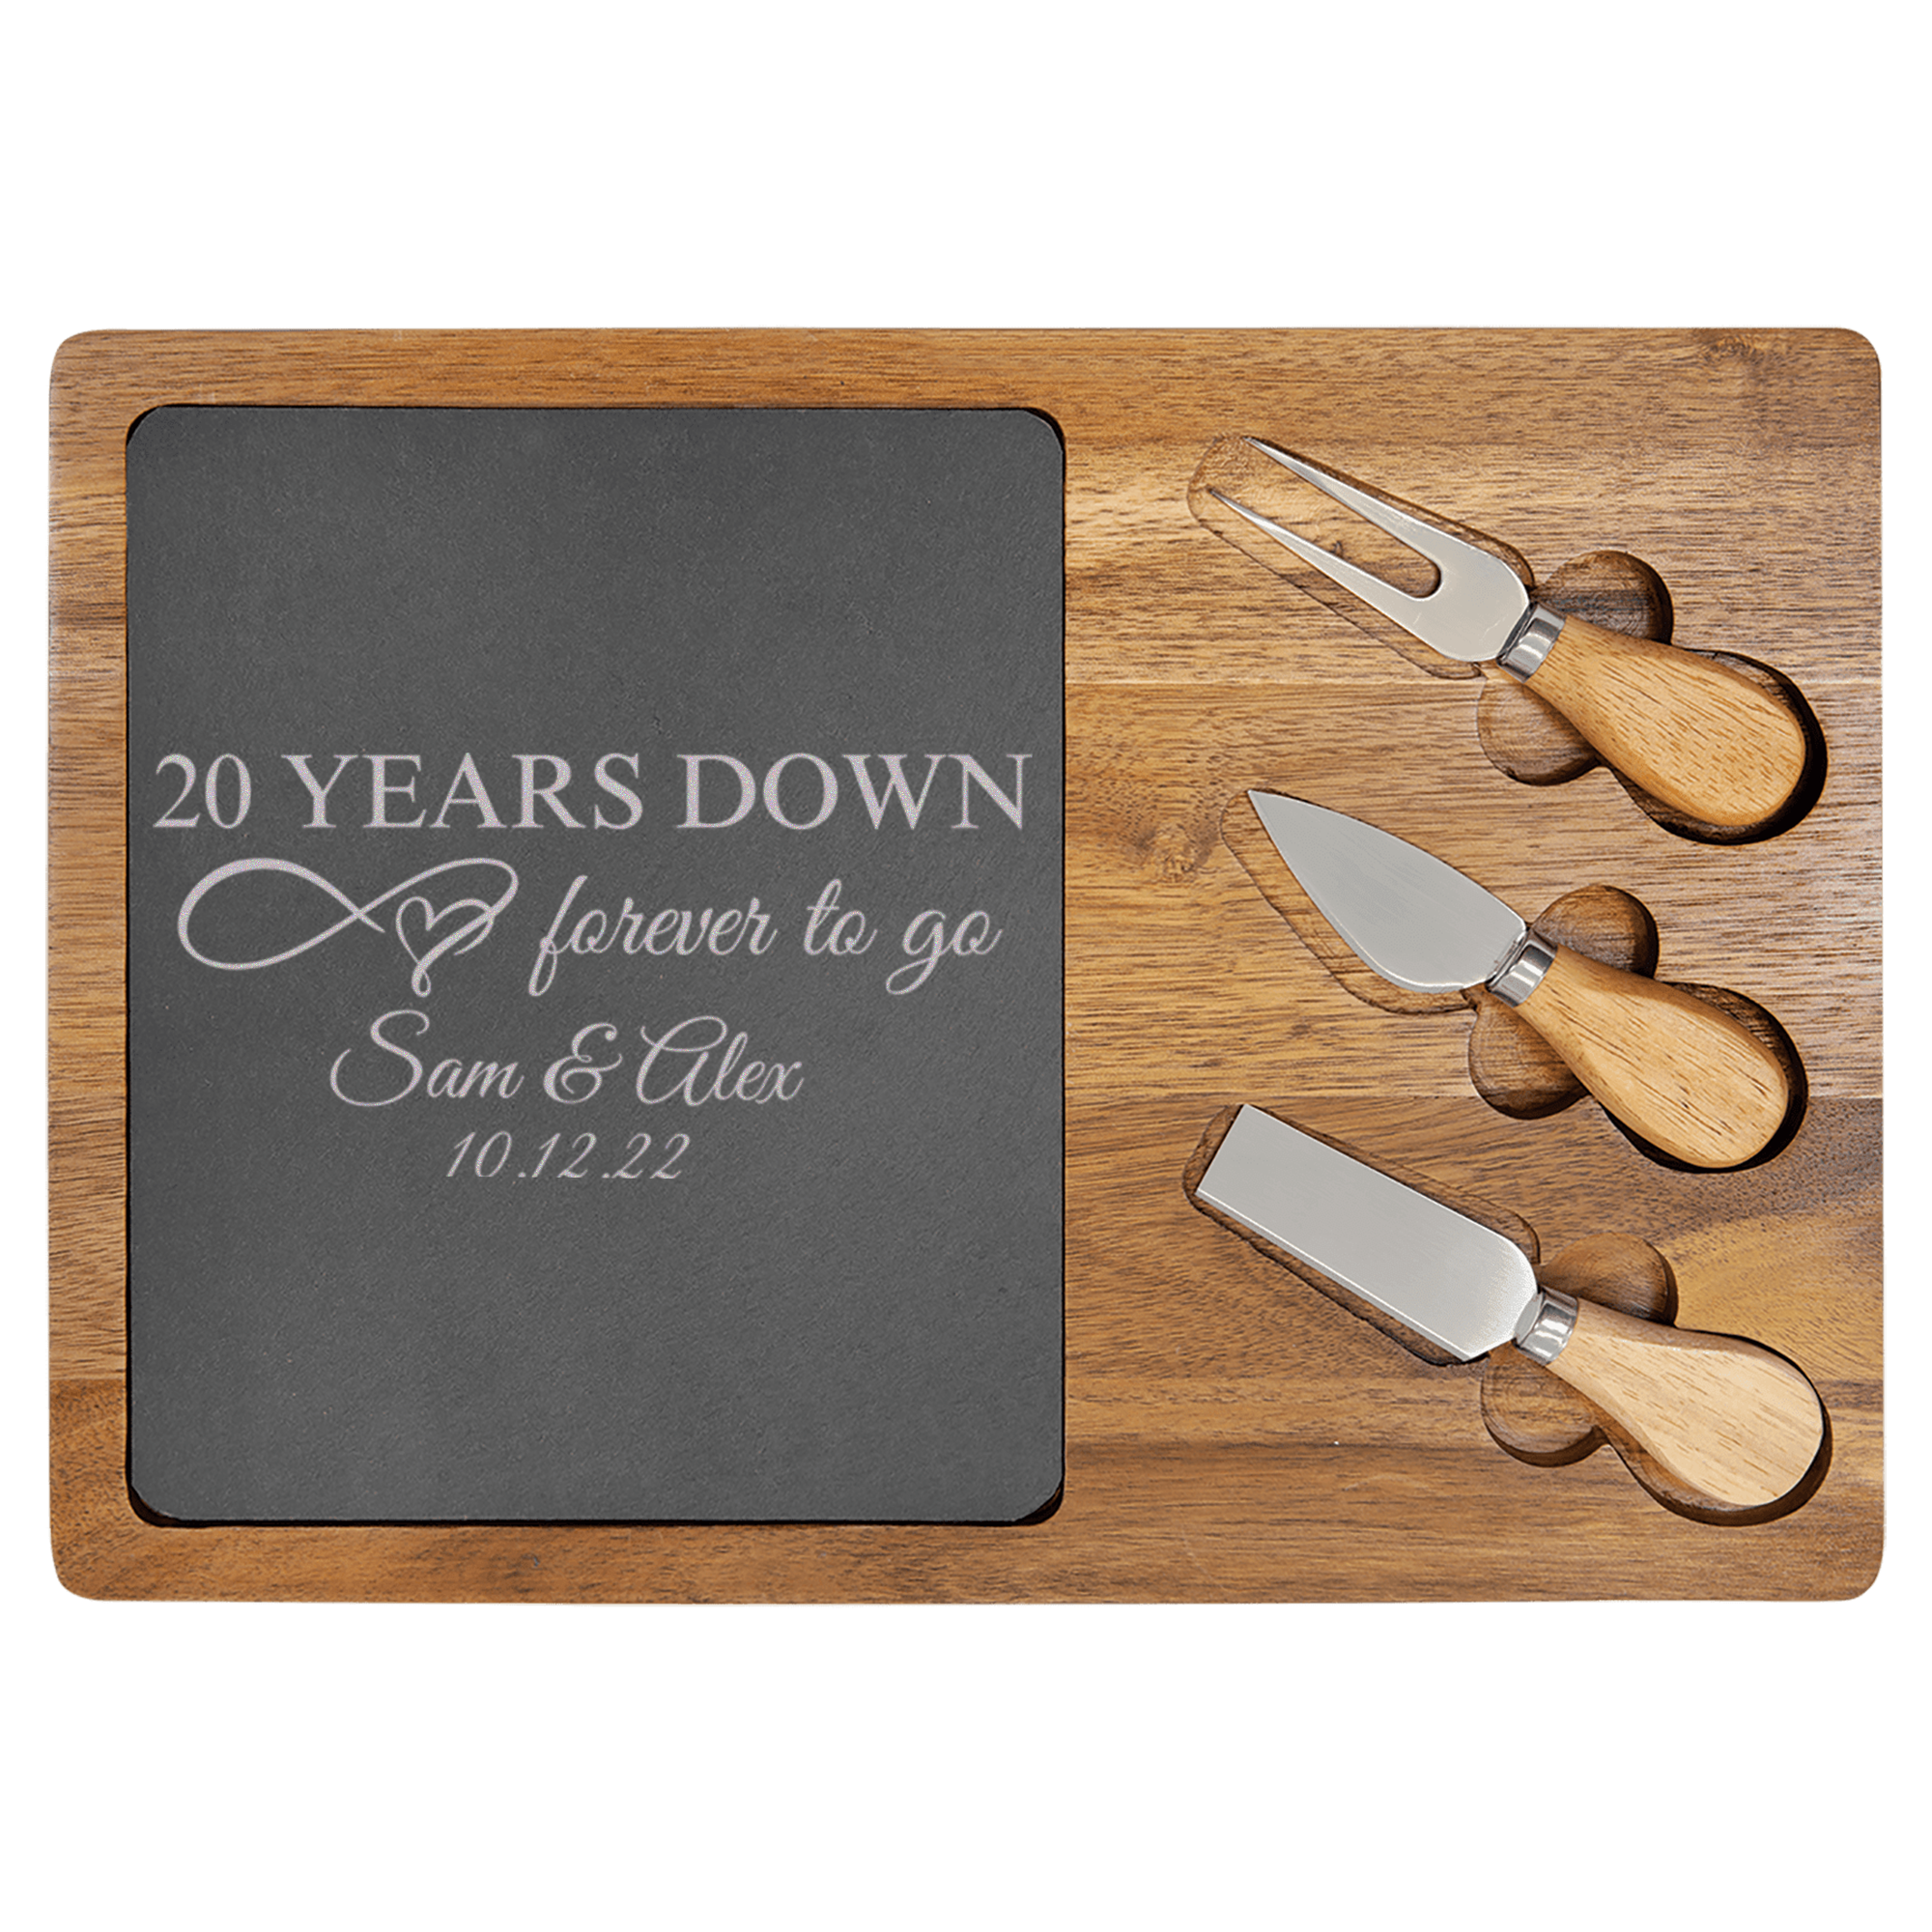 20 Years Down Wood Slate Serving Tray